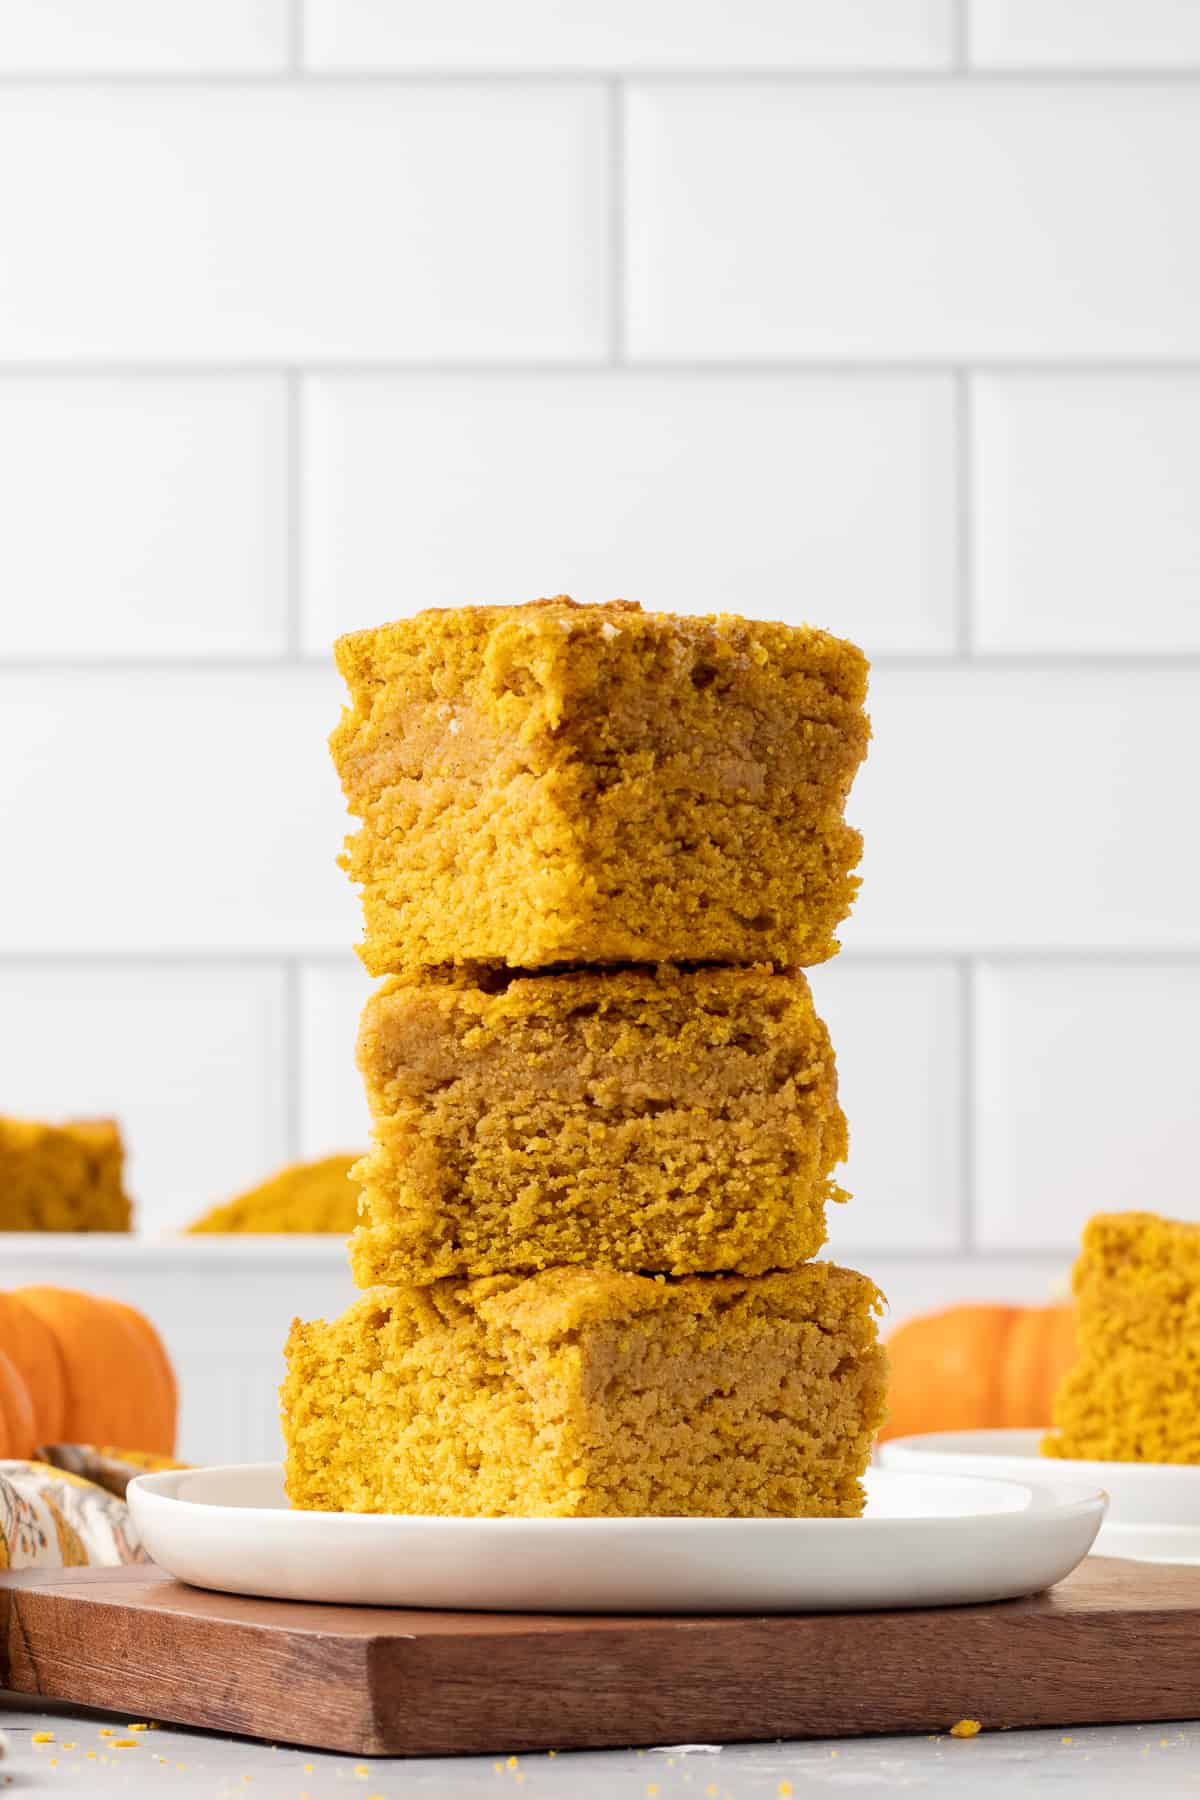 A stack of three slices of pumpkin cornbread on a white plate with a tile backsplash behind it.